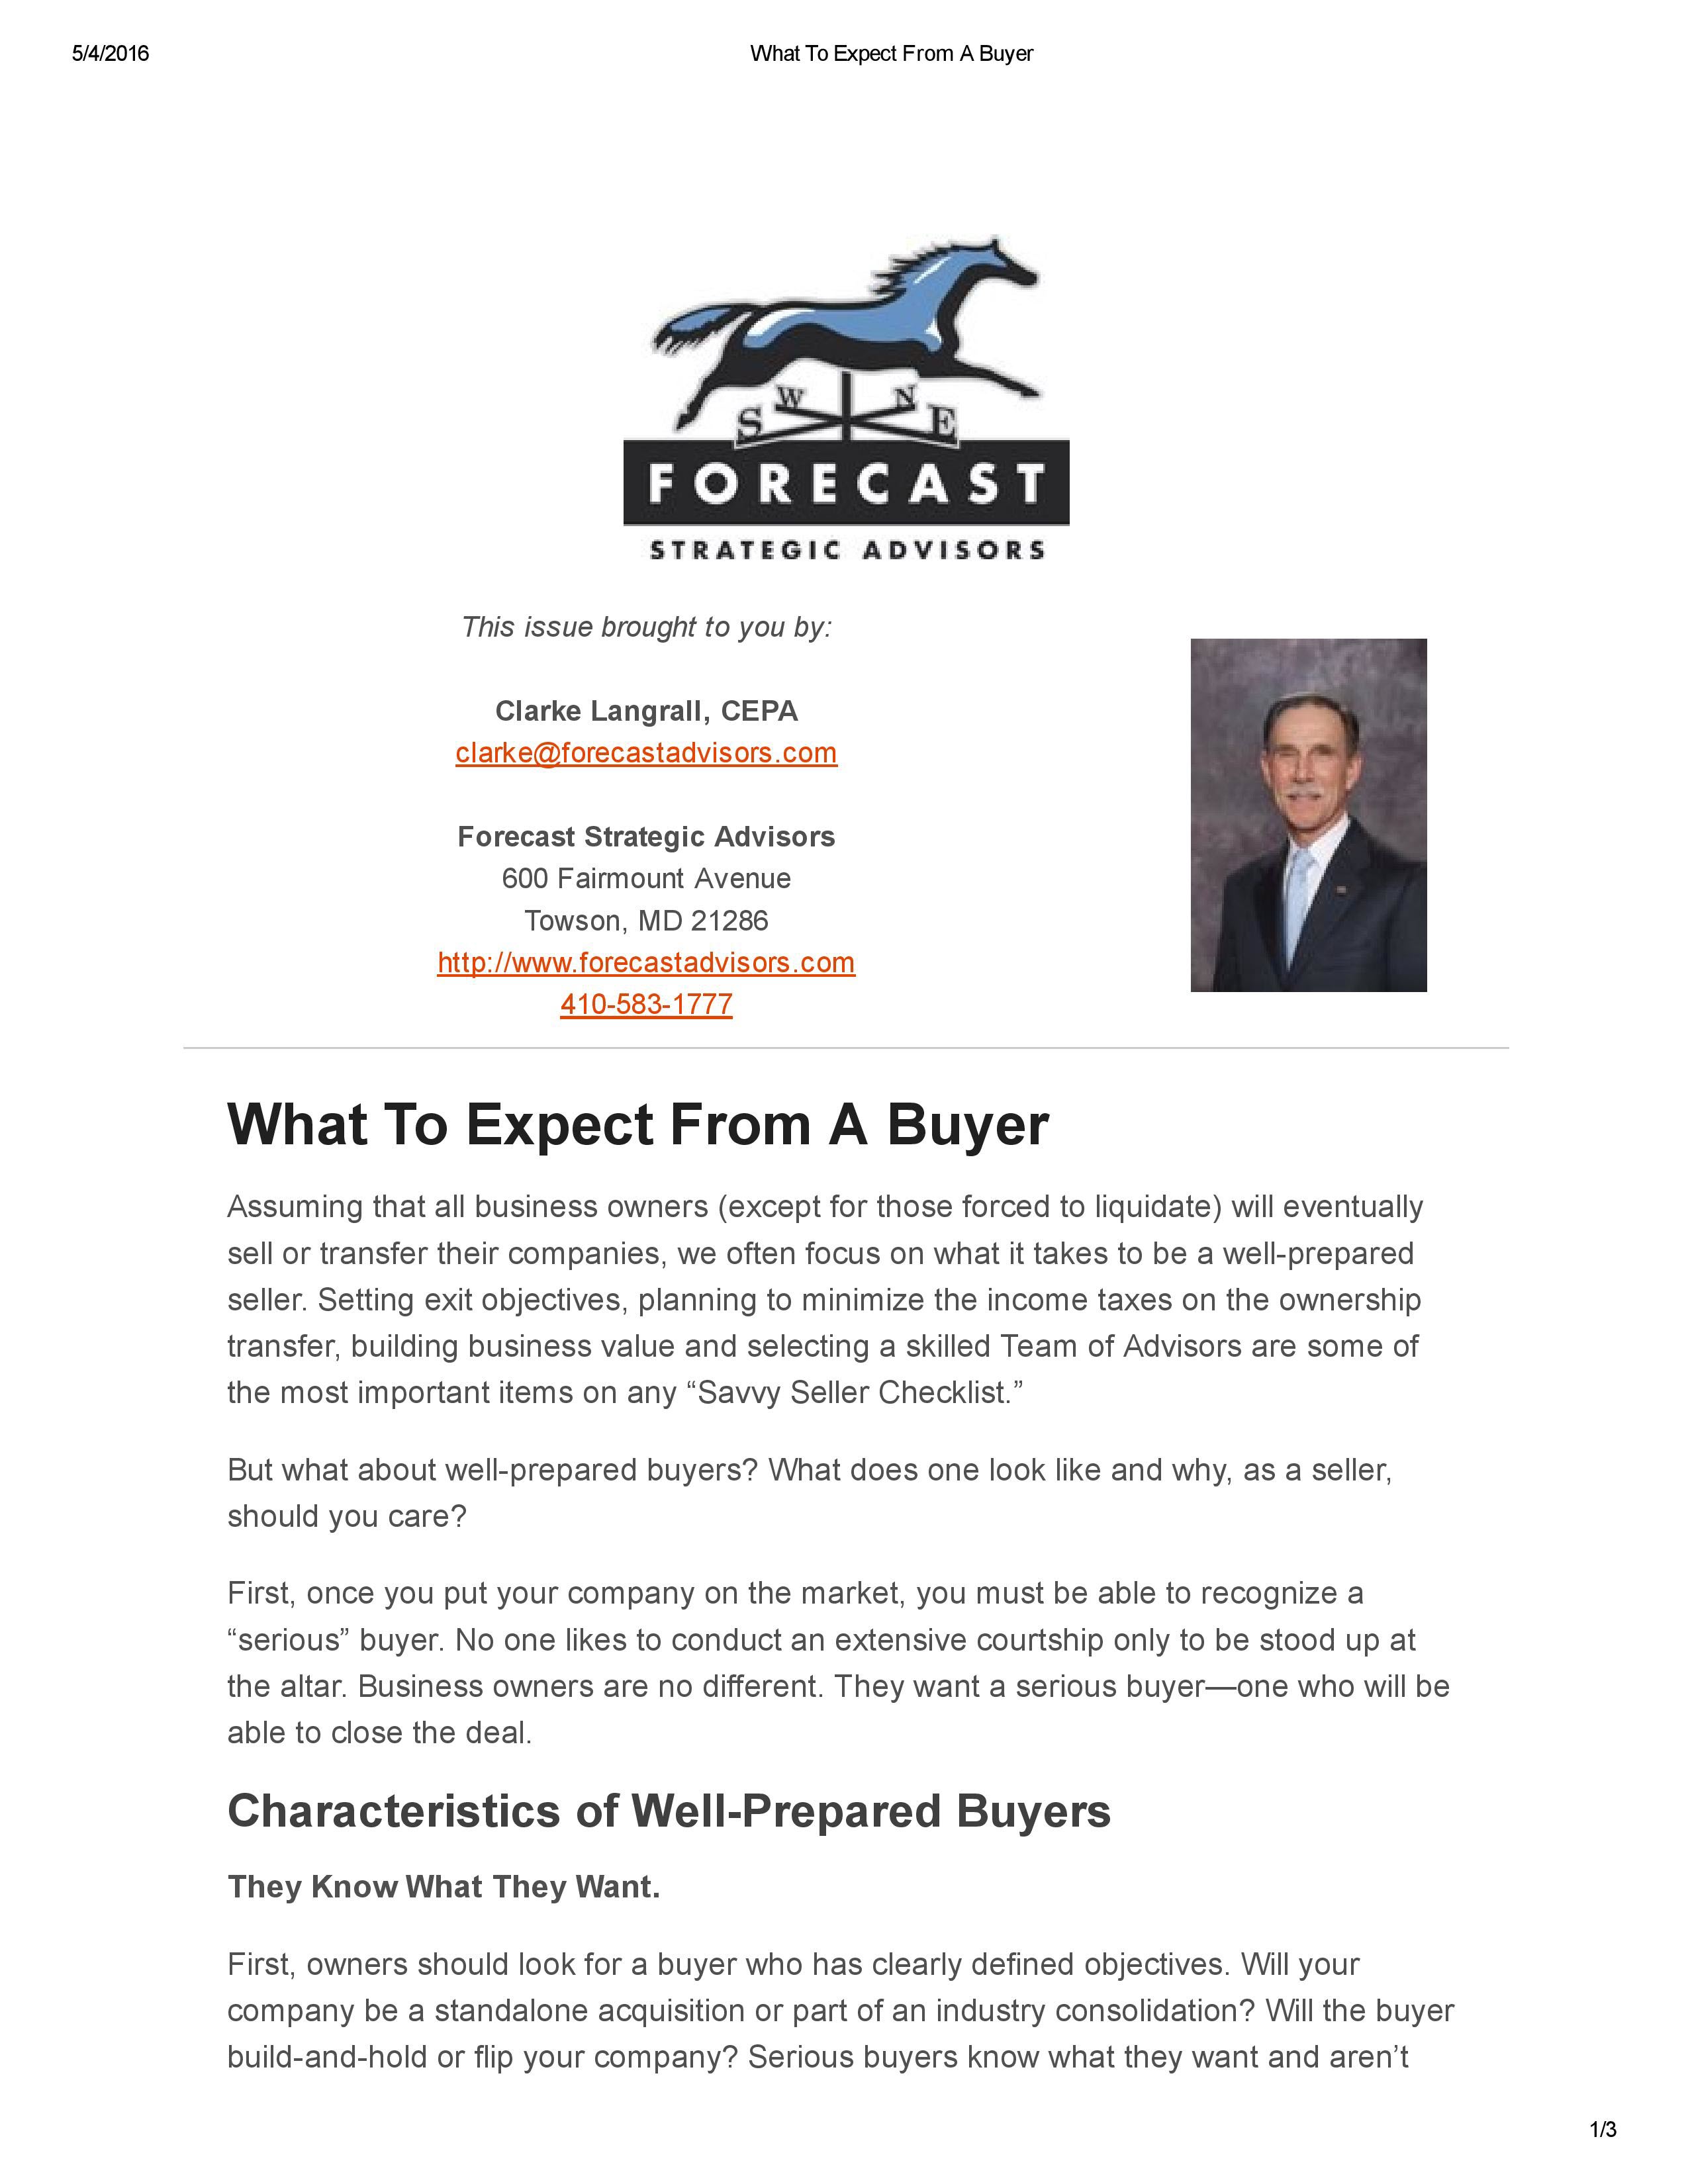 What To Expect From A Buyer_Forecast Strategic Advisors April 216 Newsletter-page-001